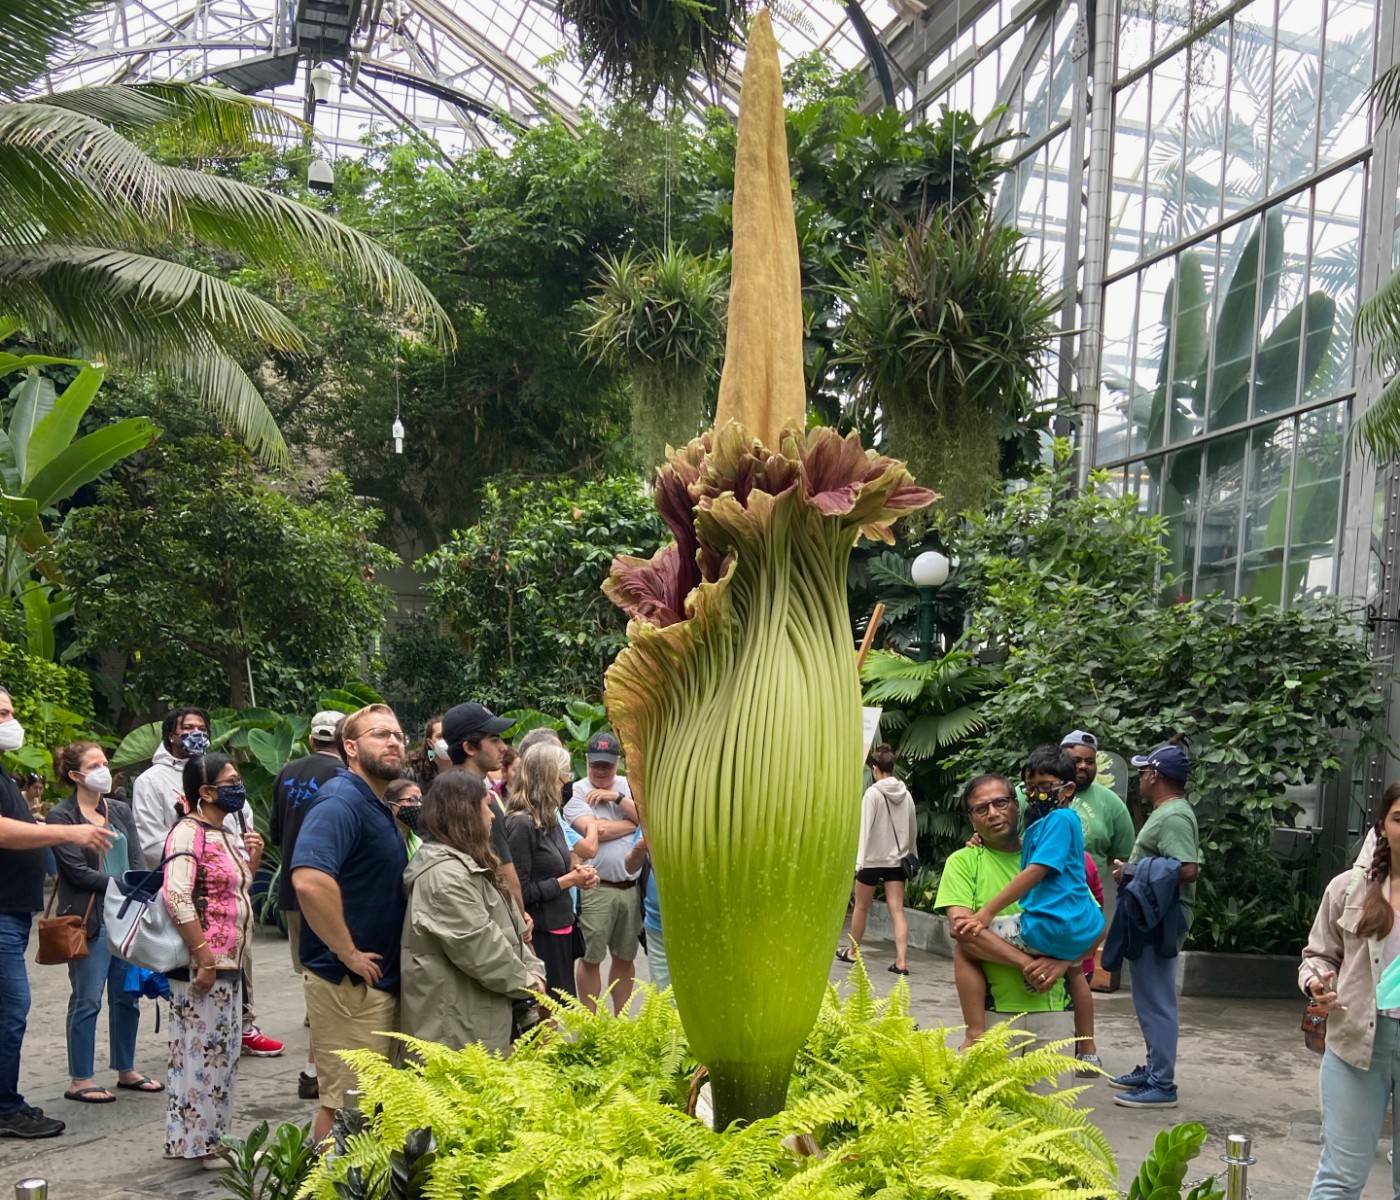 From the annals of quirky adventures: Esprit de corpse flower